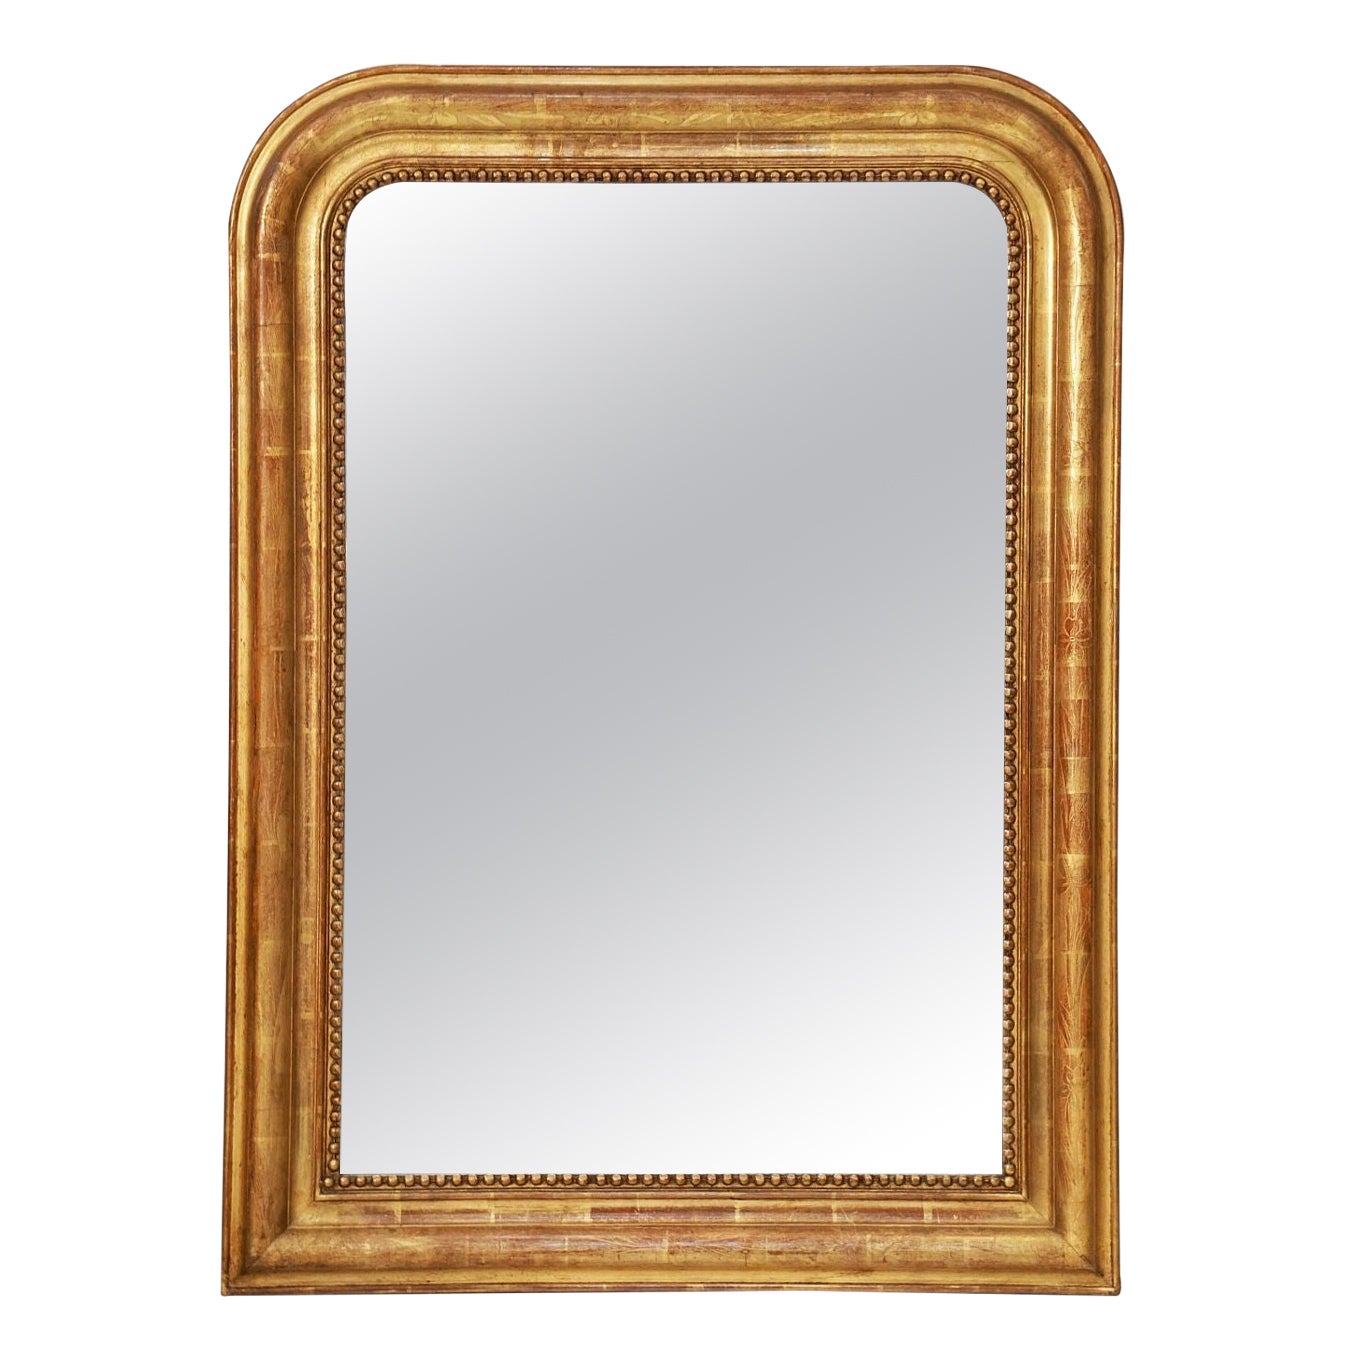 Louis Philippe Arch Top Gilt Mirror from France (H 39 1/2 x W 28 3/4)